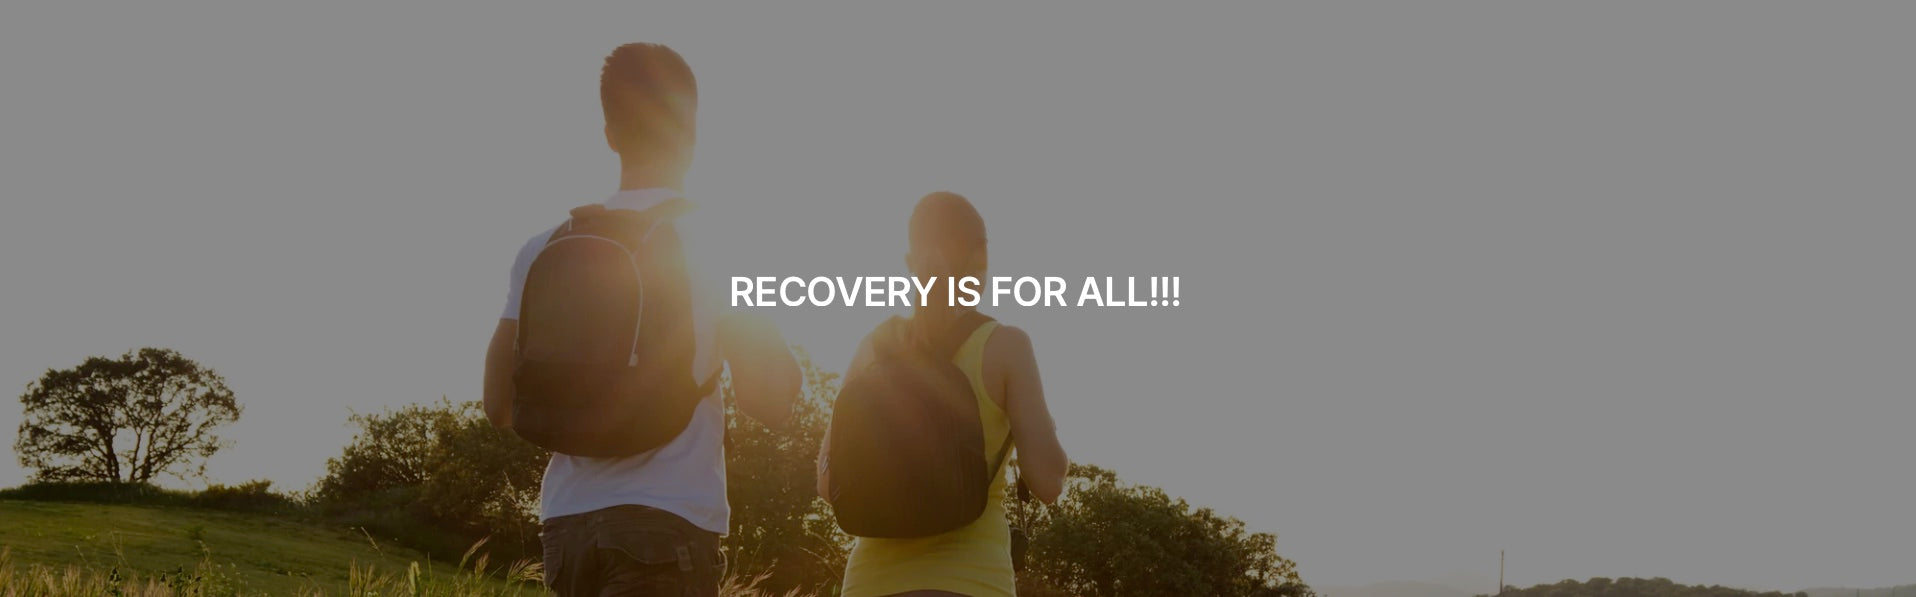 Recovery is for all